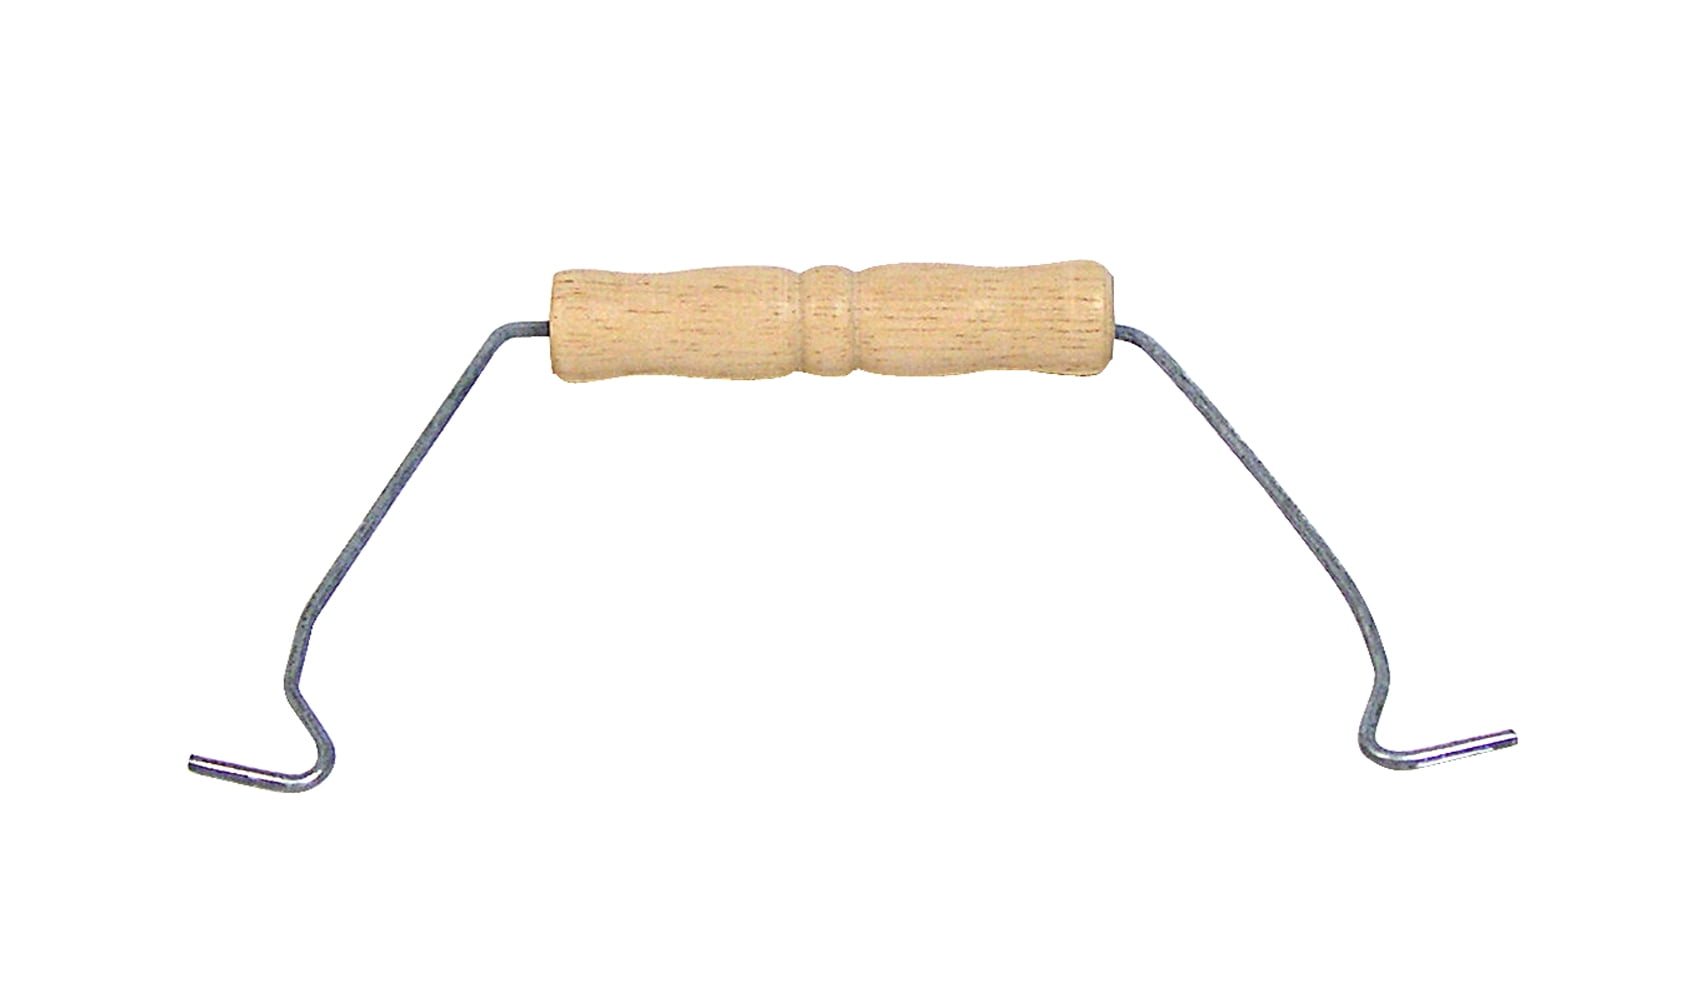 New Craft Wire And Wood Handle for Basket Weaving With Splines About 7 Inches 